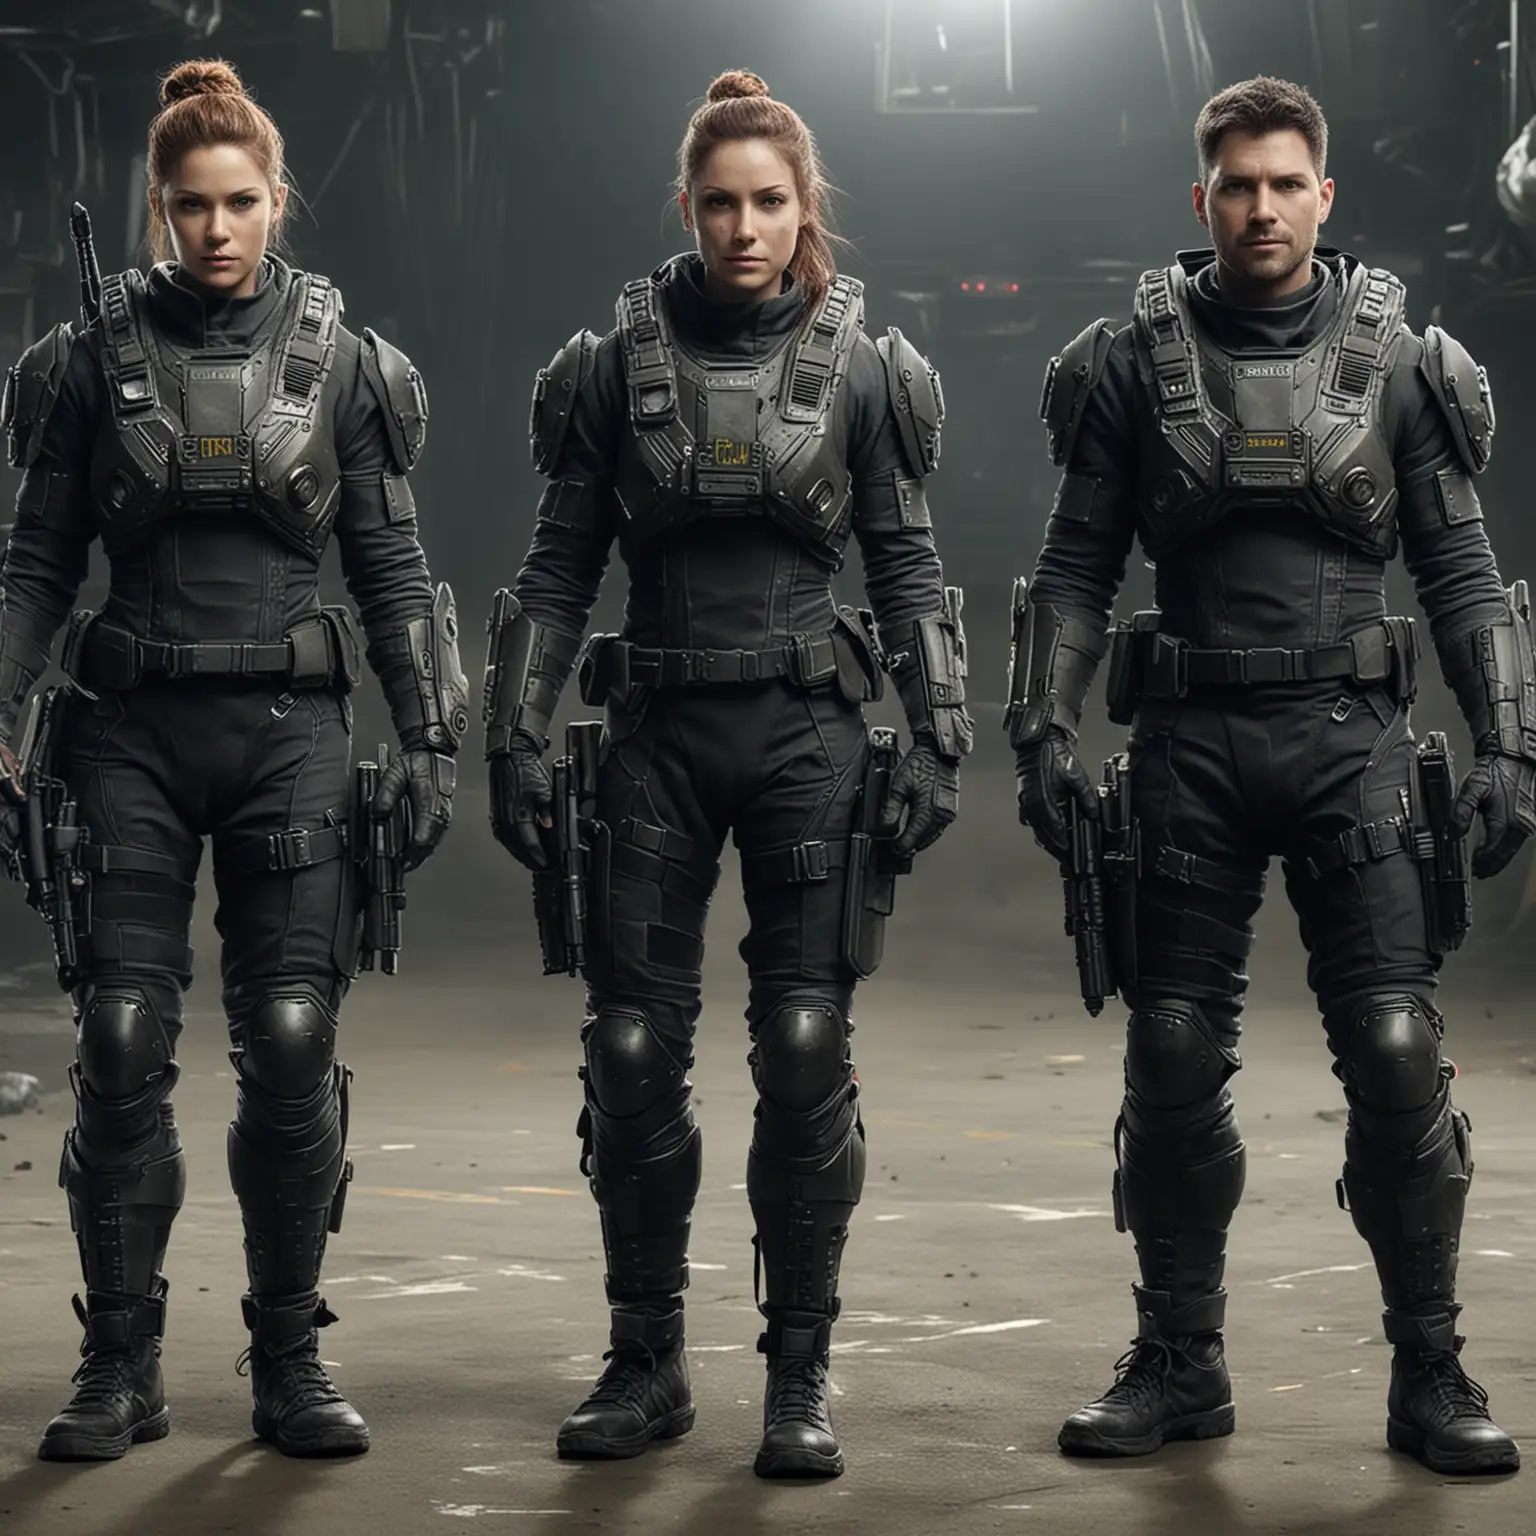 SciFi-Tactical-Future-Team-in-Action